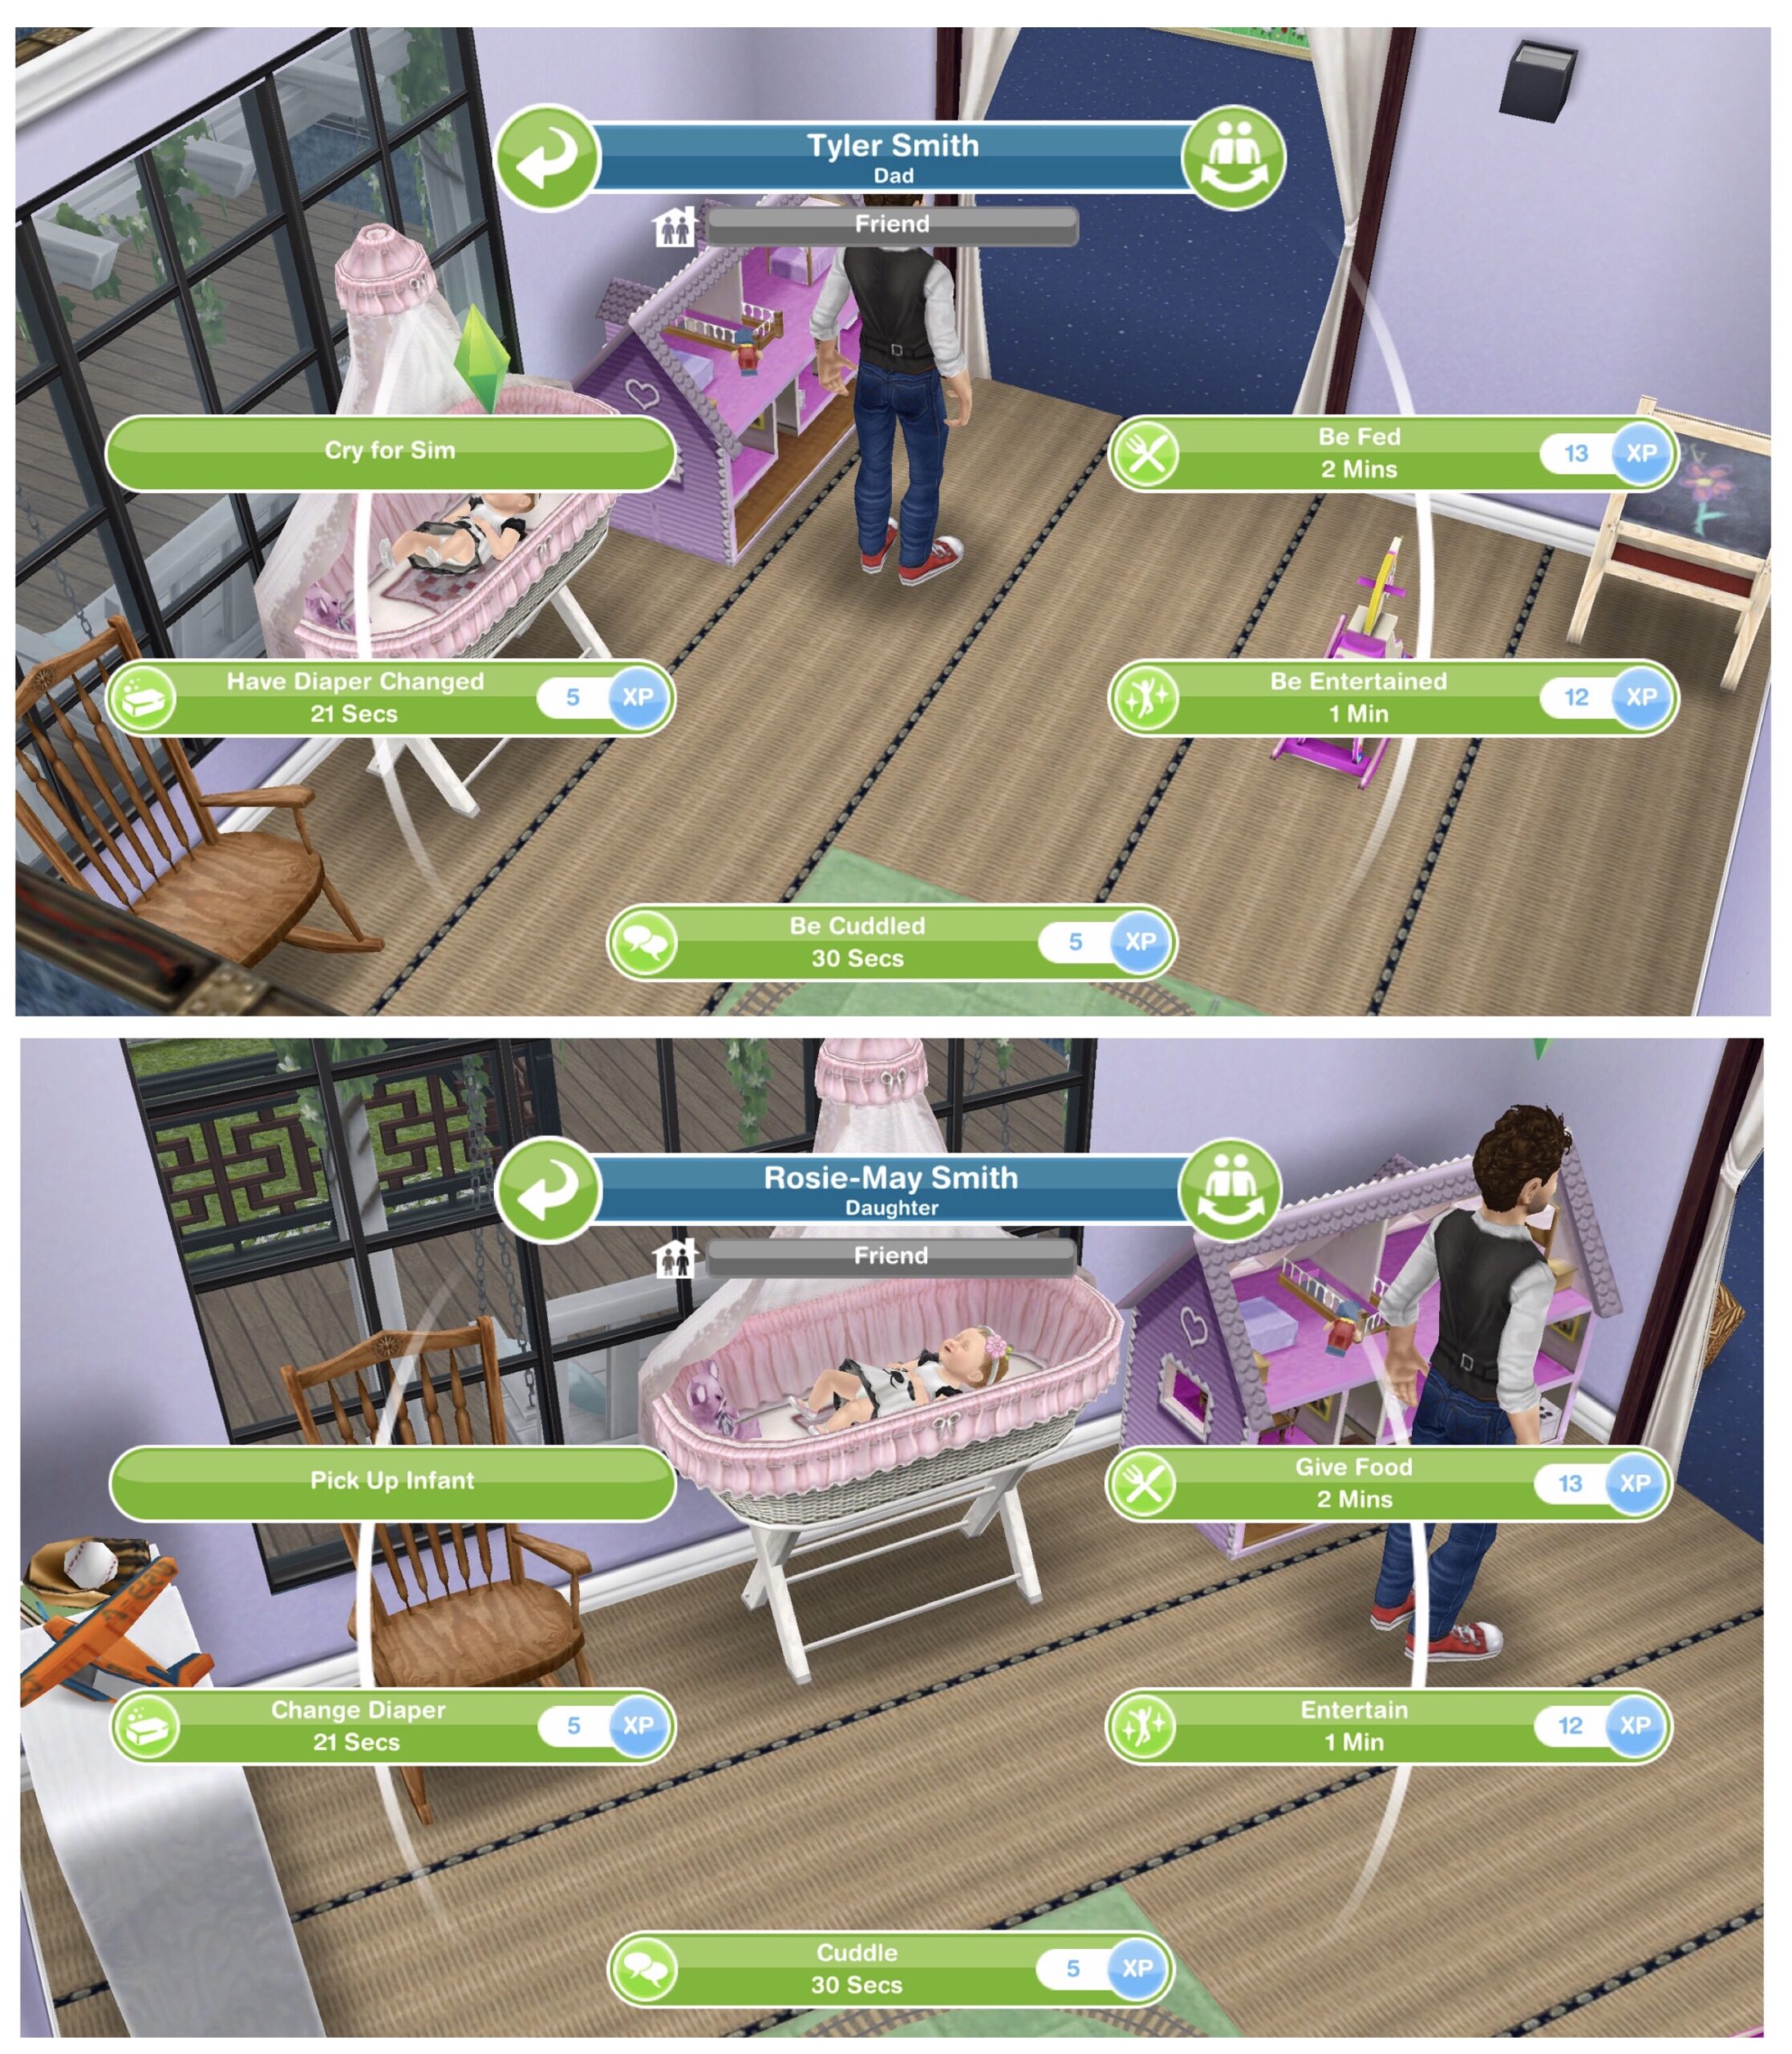 sims freeplay baby toilet won't go up Freeplay sims baby